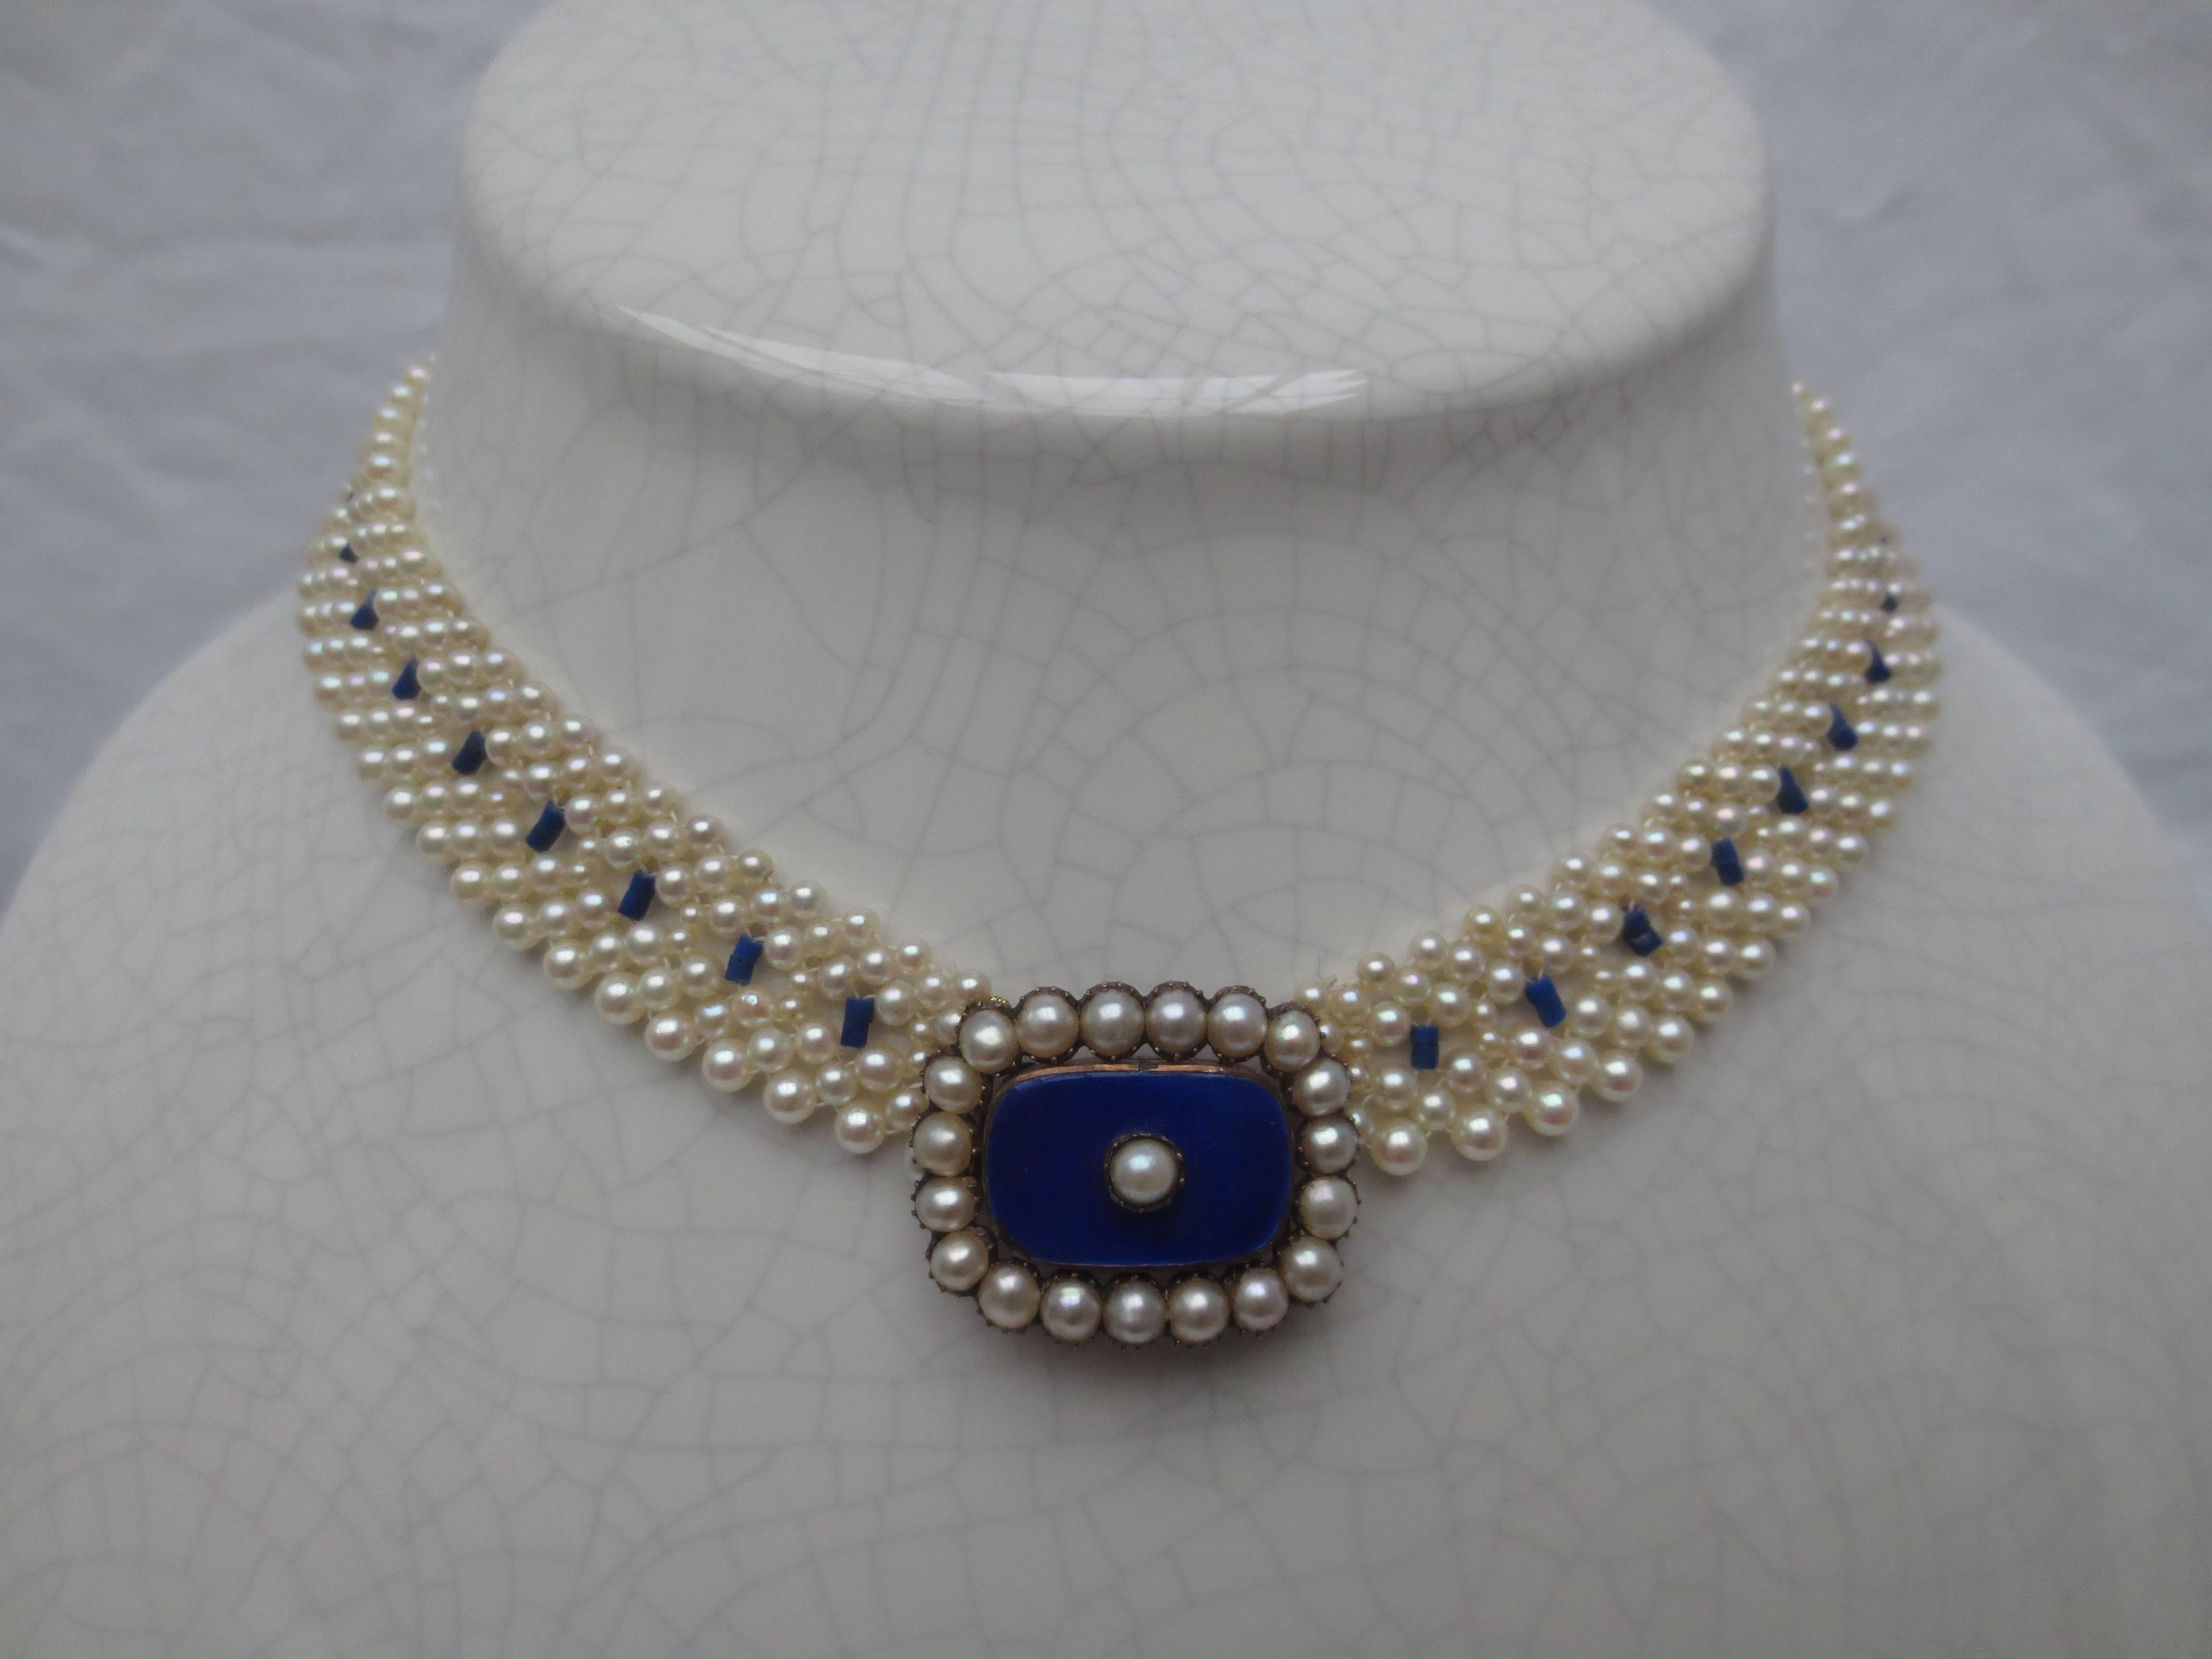 Women's Pearl, Lapis Lazuli, and Bue Enamel Necklace with Pearl and 14k Gold Clasp